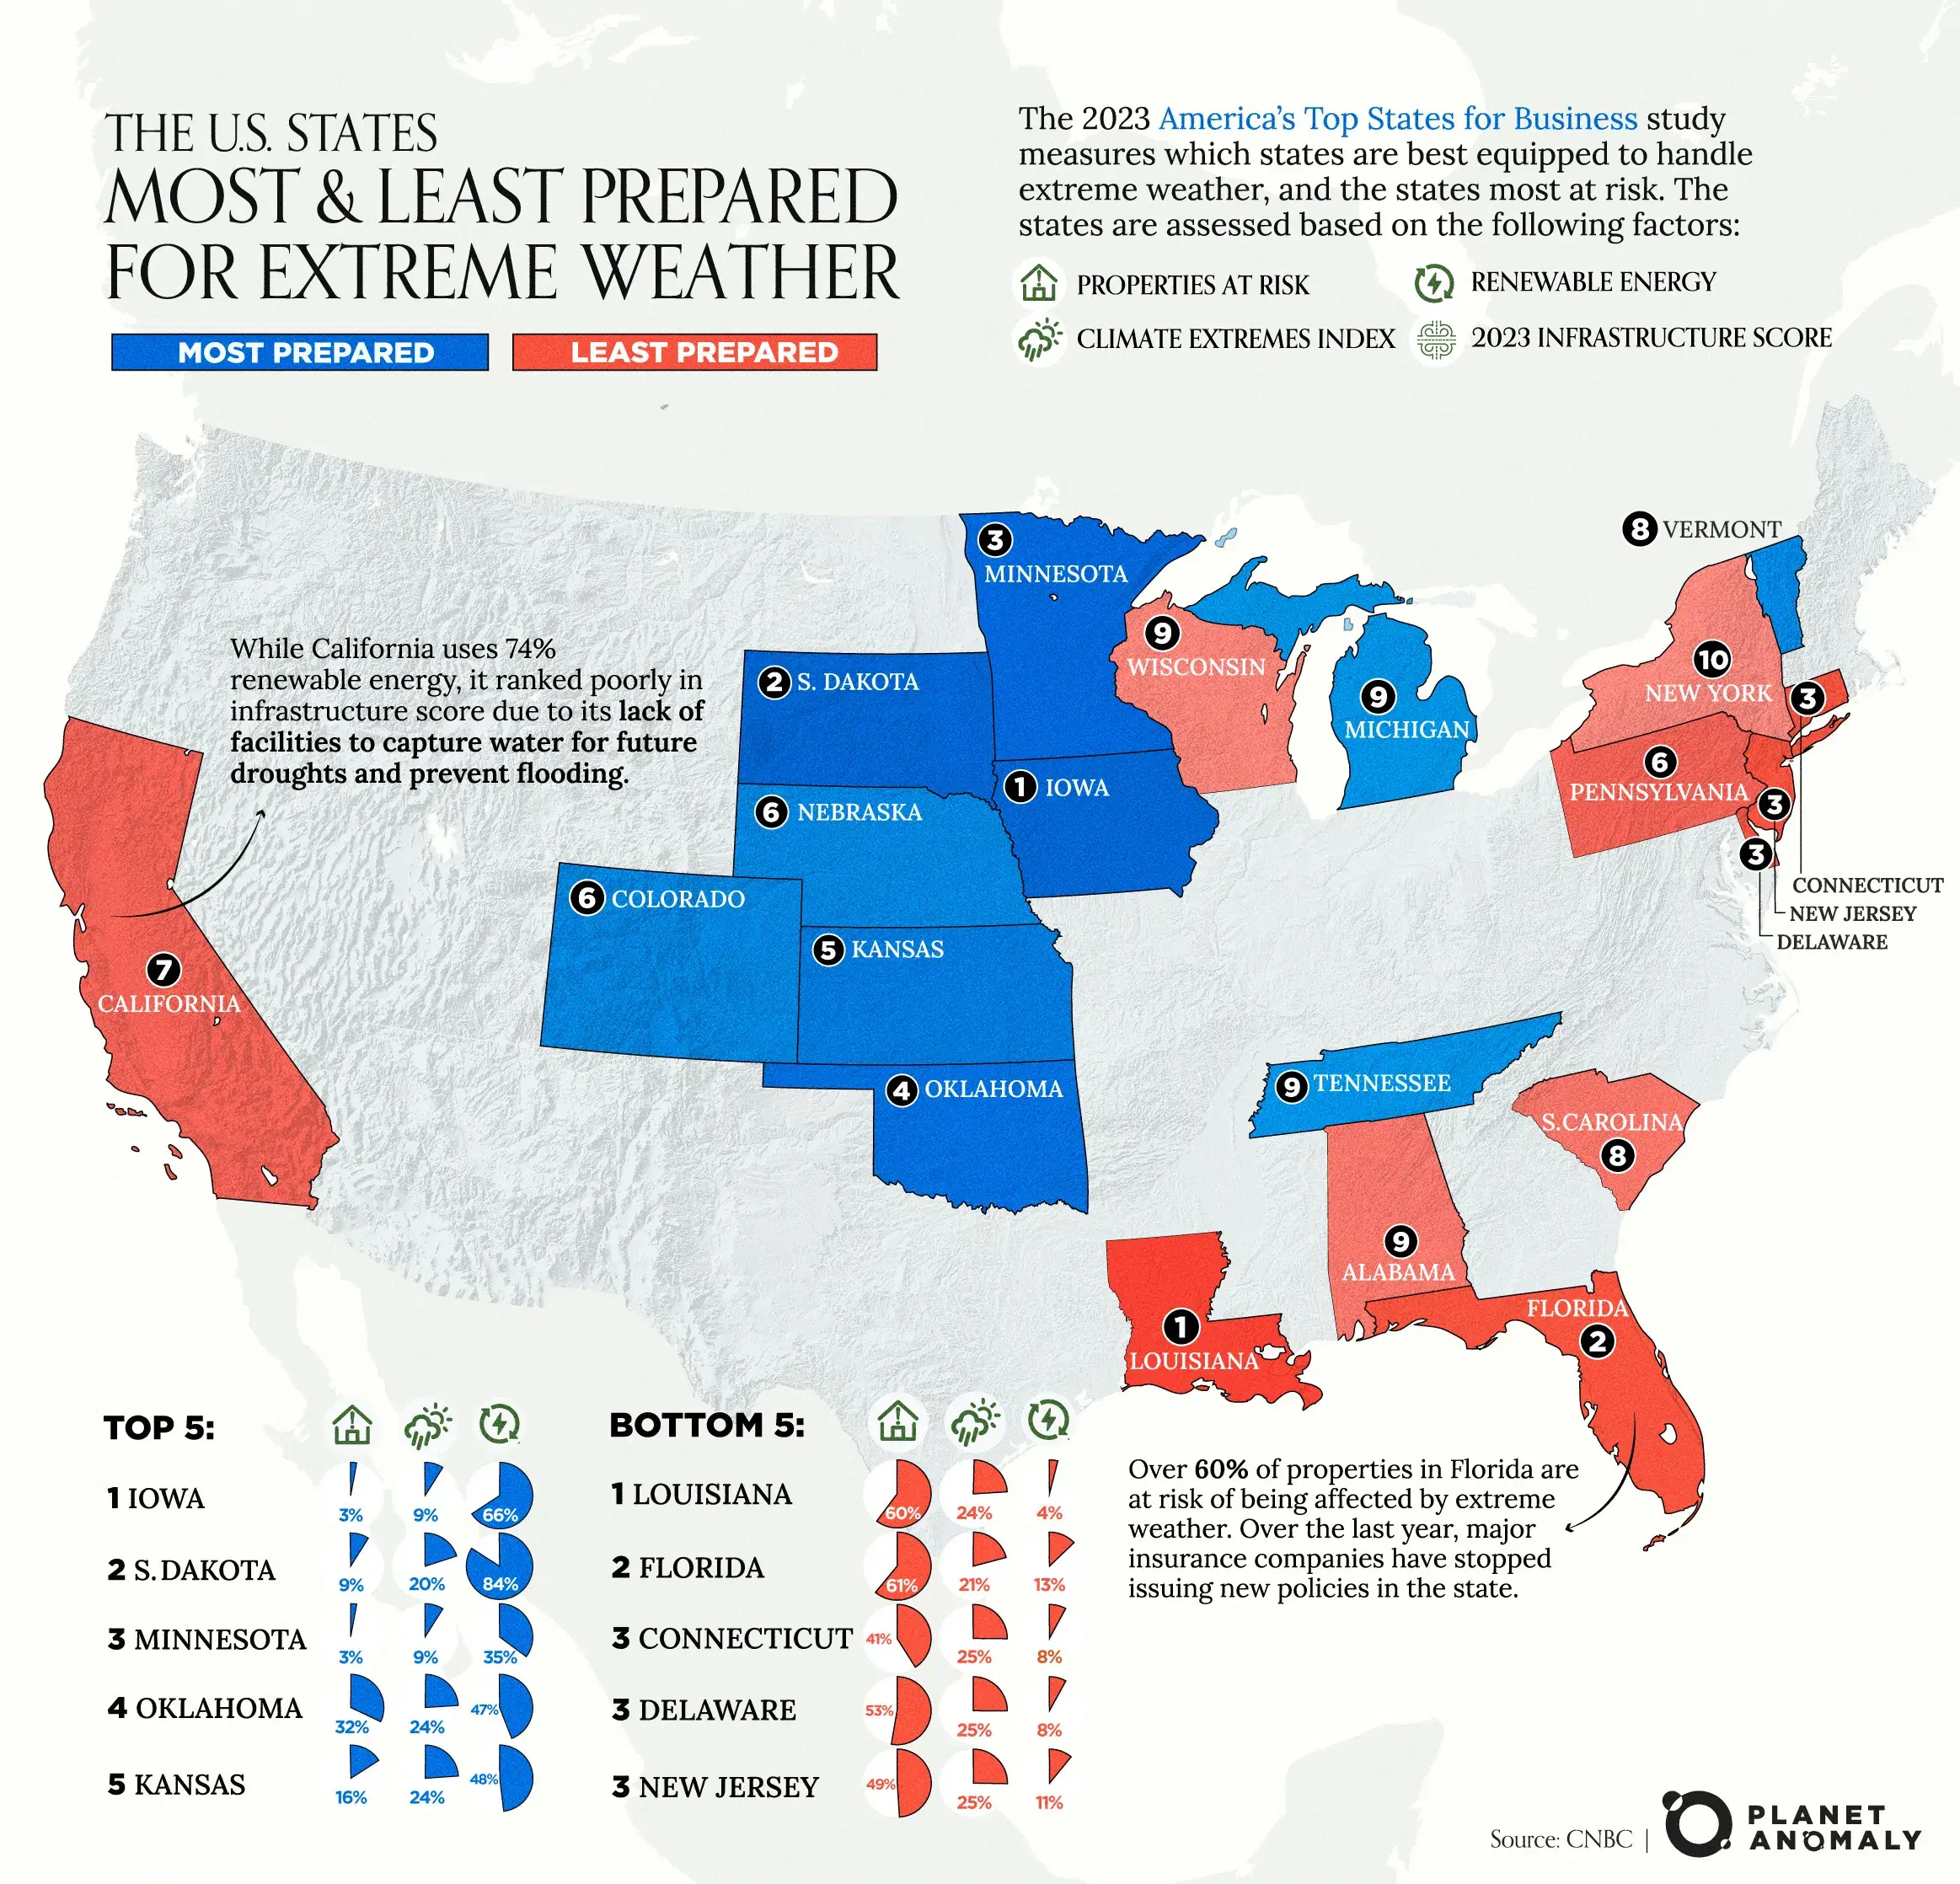 The U.S. States Most and Least Prepared for Extreme Weather